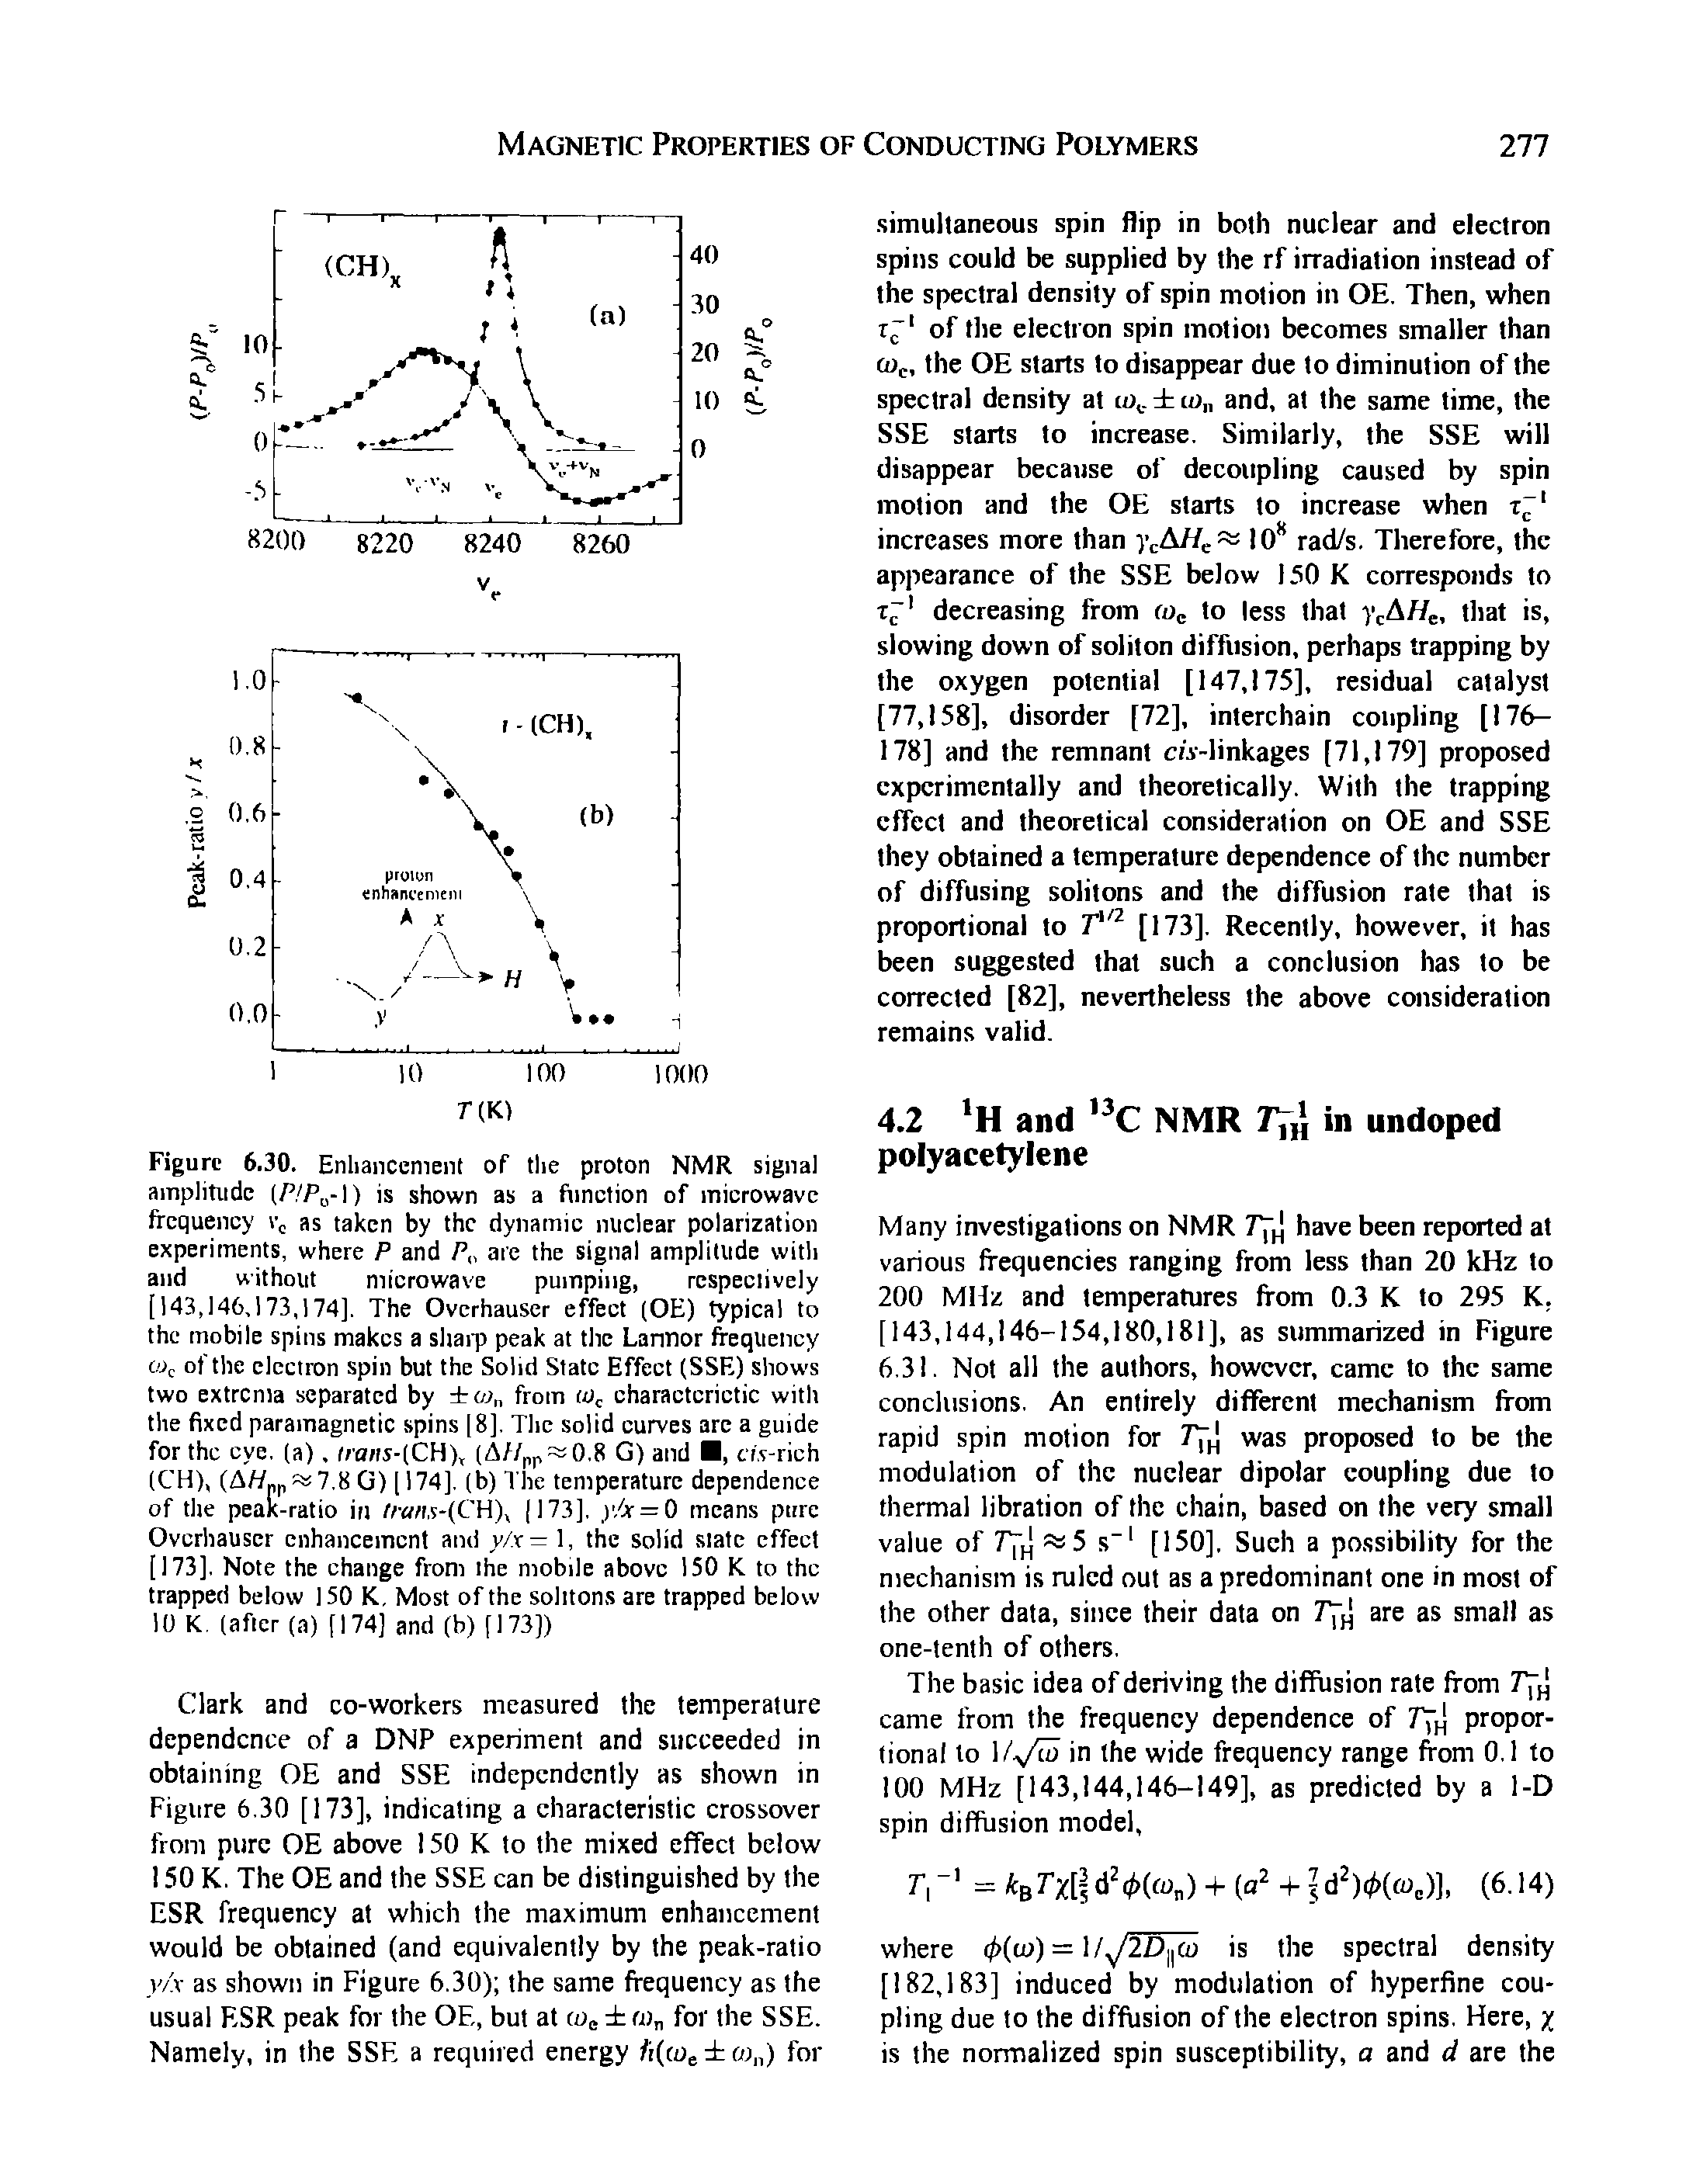 Figure 6.30. Enhancement of the proton NMR signal amplitude (P/P -l) is shown as a ftinction of microwave frequency as taken by the dynamic nuclear polarization experiments, where P and / are the signal amplitude with and without microwave pumping, respectively [143,146,173,174], The Overhauser effect (OE) typical to the mobile spins makes a shaip peak at the Lannor frequency cve of the electron spin but the Solid State Effect (SSE) shows two extrema separated by o from (O charactcrictic with the fixed paramagnetic spins [8], The solid curves are a guide for the eye. (a). t a is-(CH), (A//pp 0.8 G) and , trs-rich (CH)> (Affpp 7.8 G) 1174]. (b) The temperature dependence of the peak-ratio in //ww-(CH), 173], y/x = 0 means pure Overhauser enhancement and y/x— 1, the solid slate effect [173]. Note the change from the mobile above 150 K to the trapped below 150 K, Most of the solitons are trapped below 10 K, (after (a) [174] and (b) [173])...